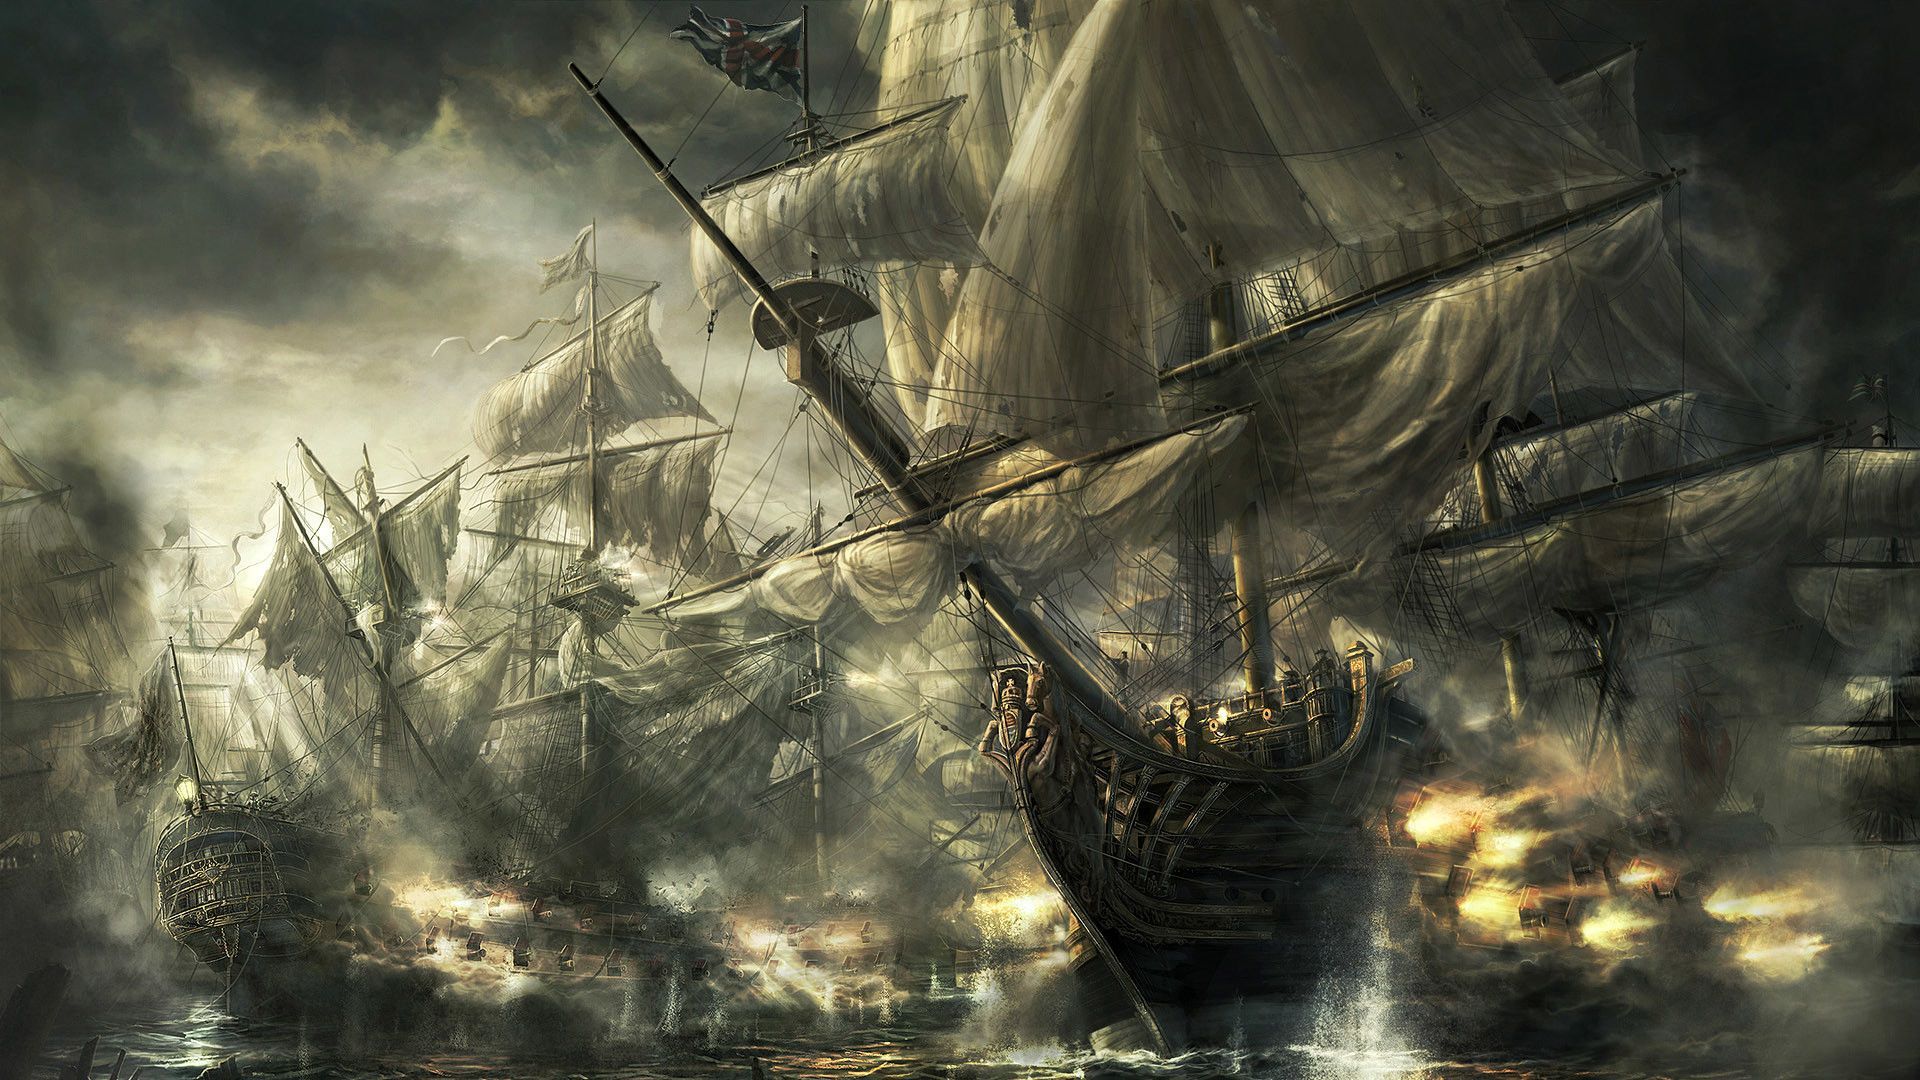 A battle between ships in the sea - Pirate